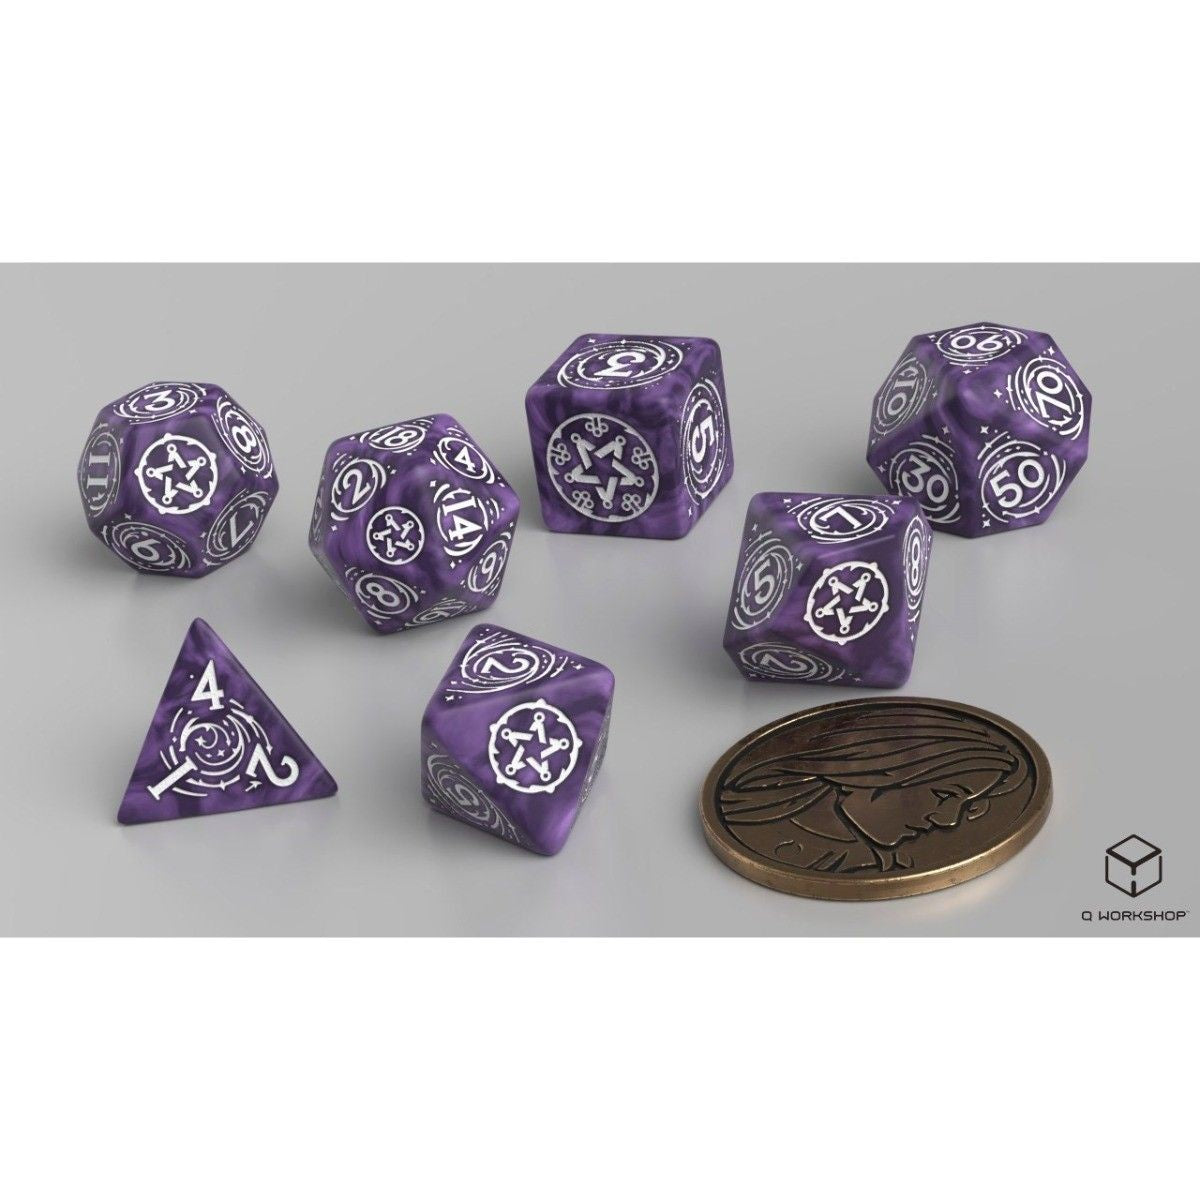 Q Workshop - The Witcher Dice Set Yennefer - Lilac and Gooseberries Dice Set with Coin